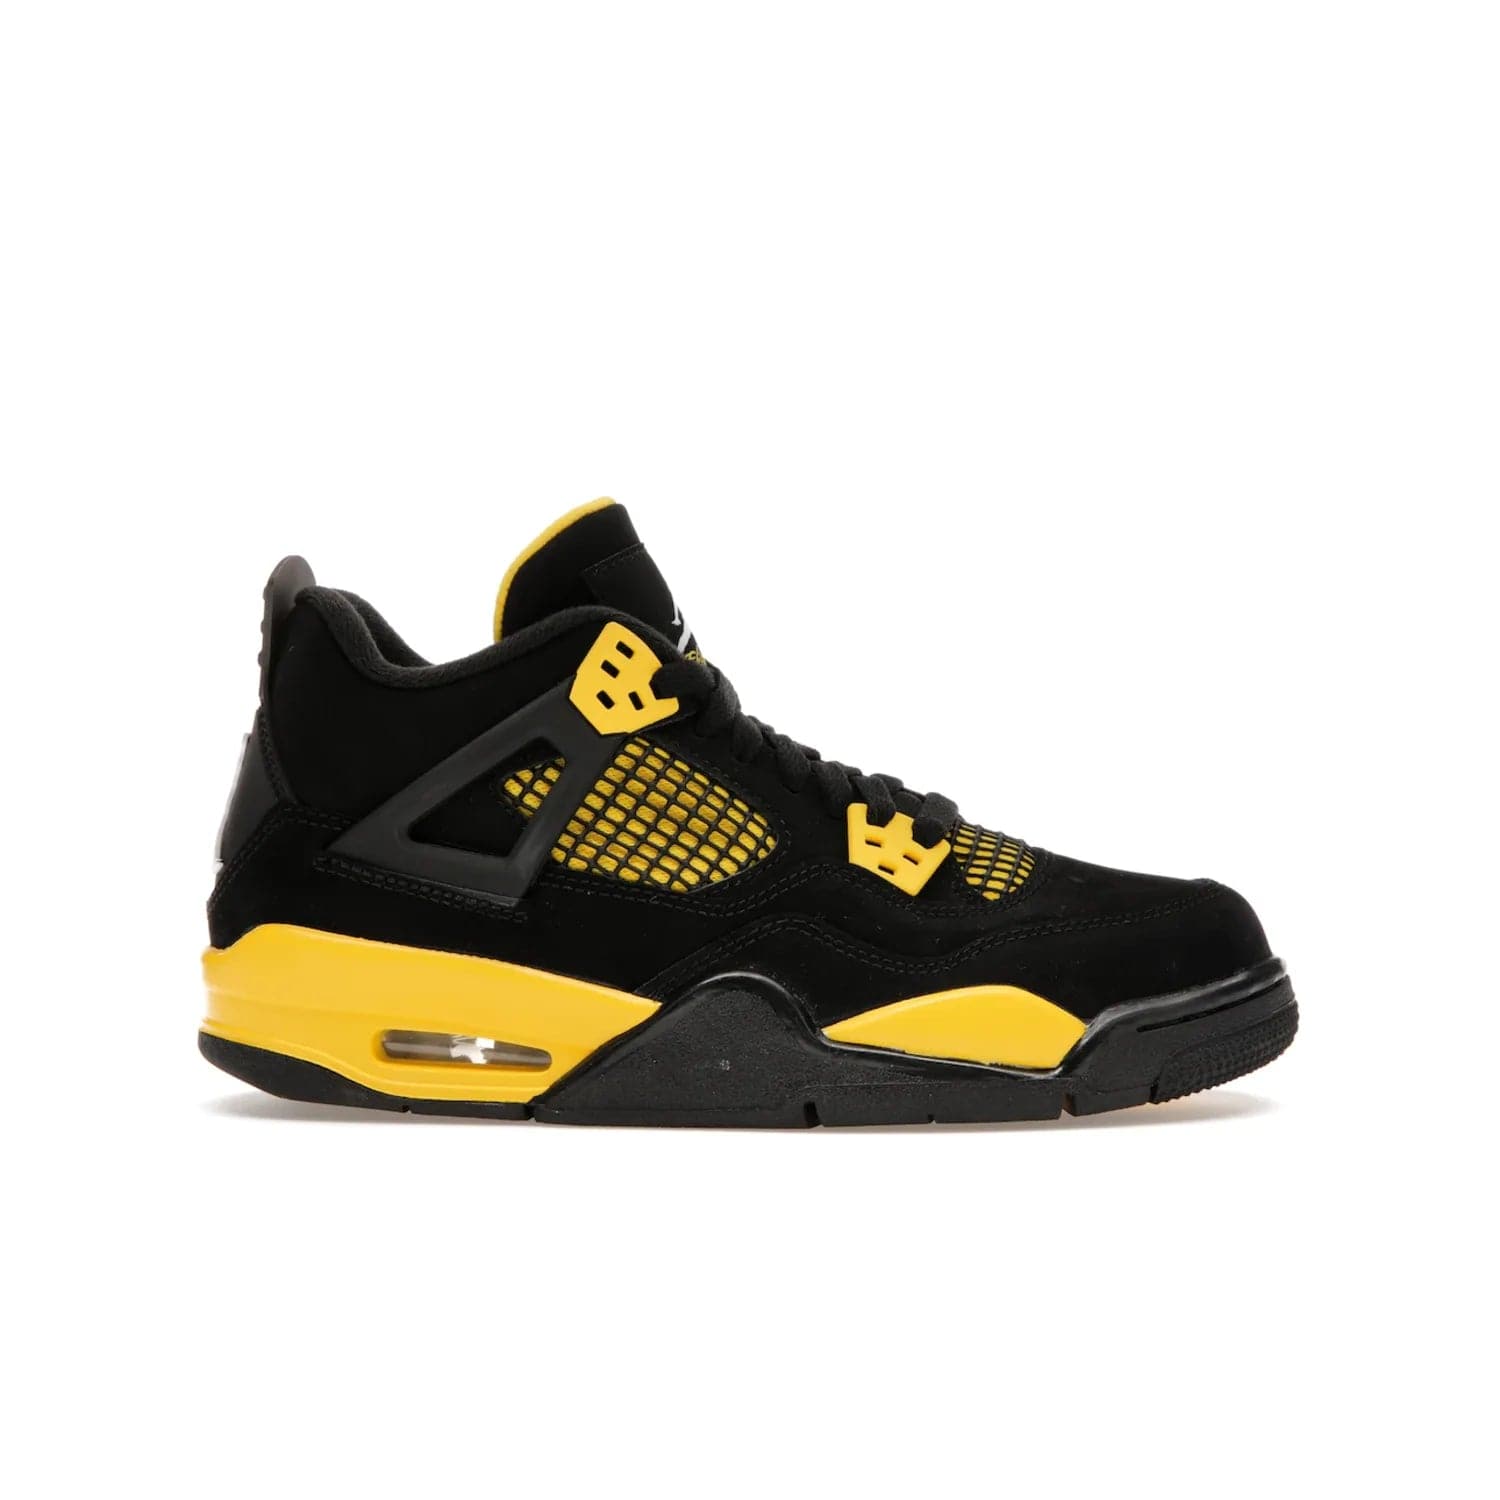 Jordan 4 Retro Thunder (2023) (GS) - Image 1 - Only at www.BallersClubKickz.com - Introducing the iconic Jordan 4 Retro Thunder from the 2023 collection! Sleek black and Tour Yellow detailing. Signature Jordan tongue tab. Mesmerizing design for sneaker collectors. Get yours now!